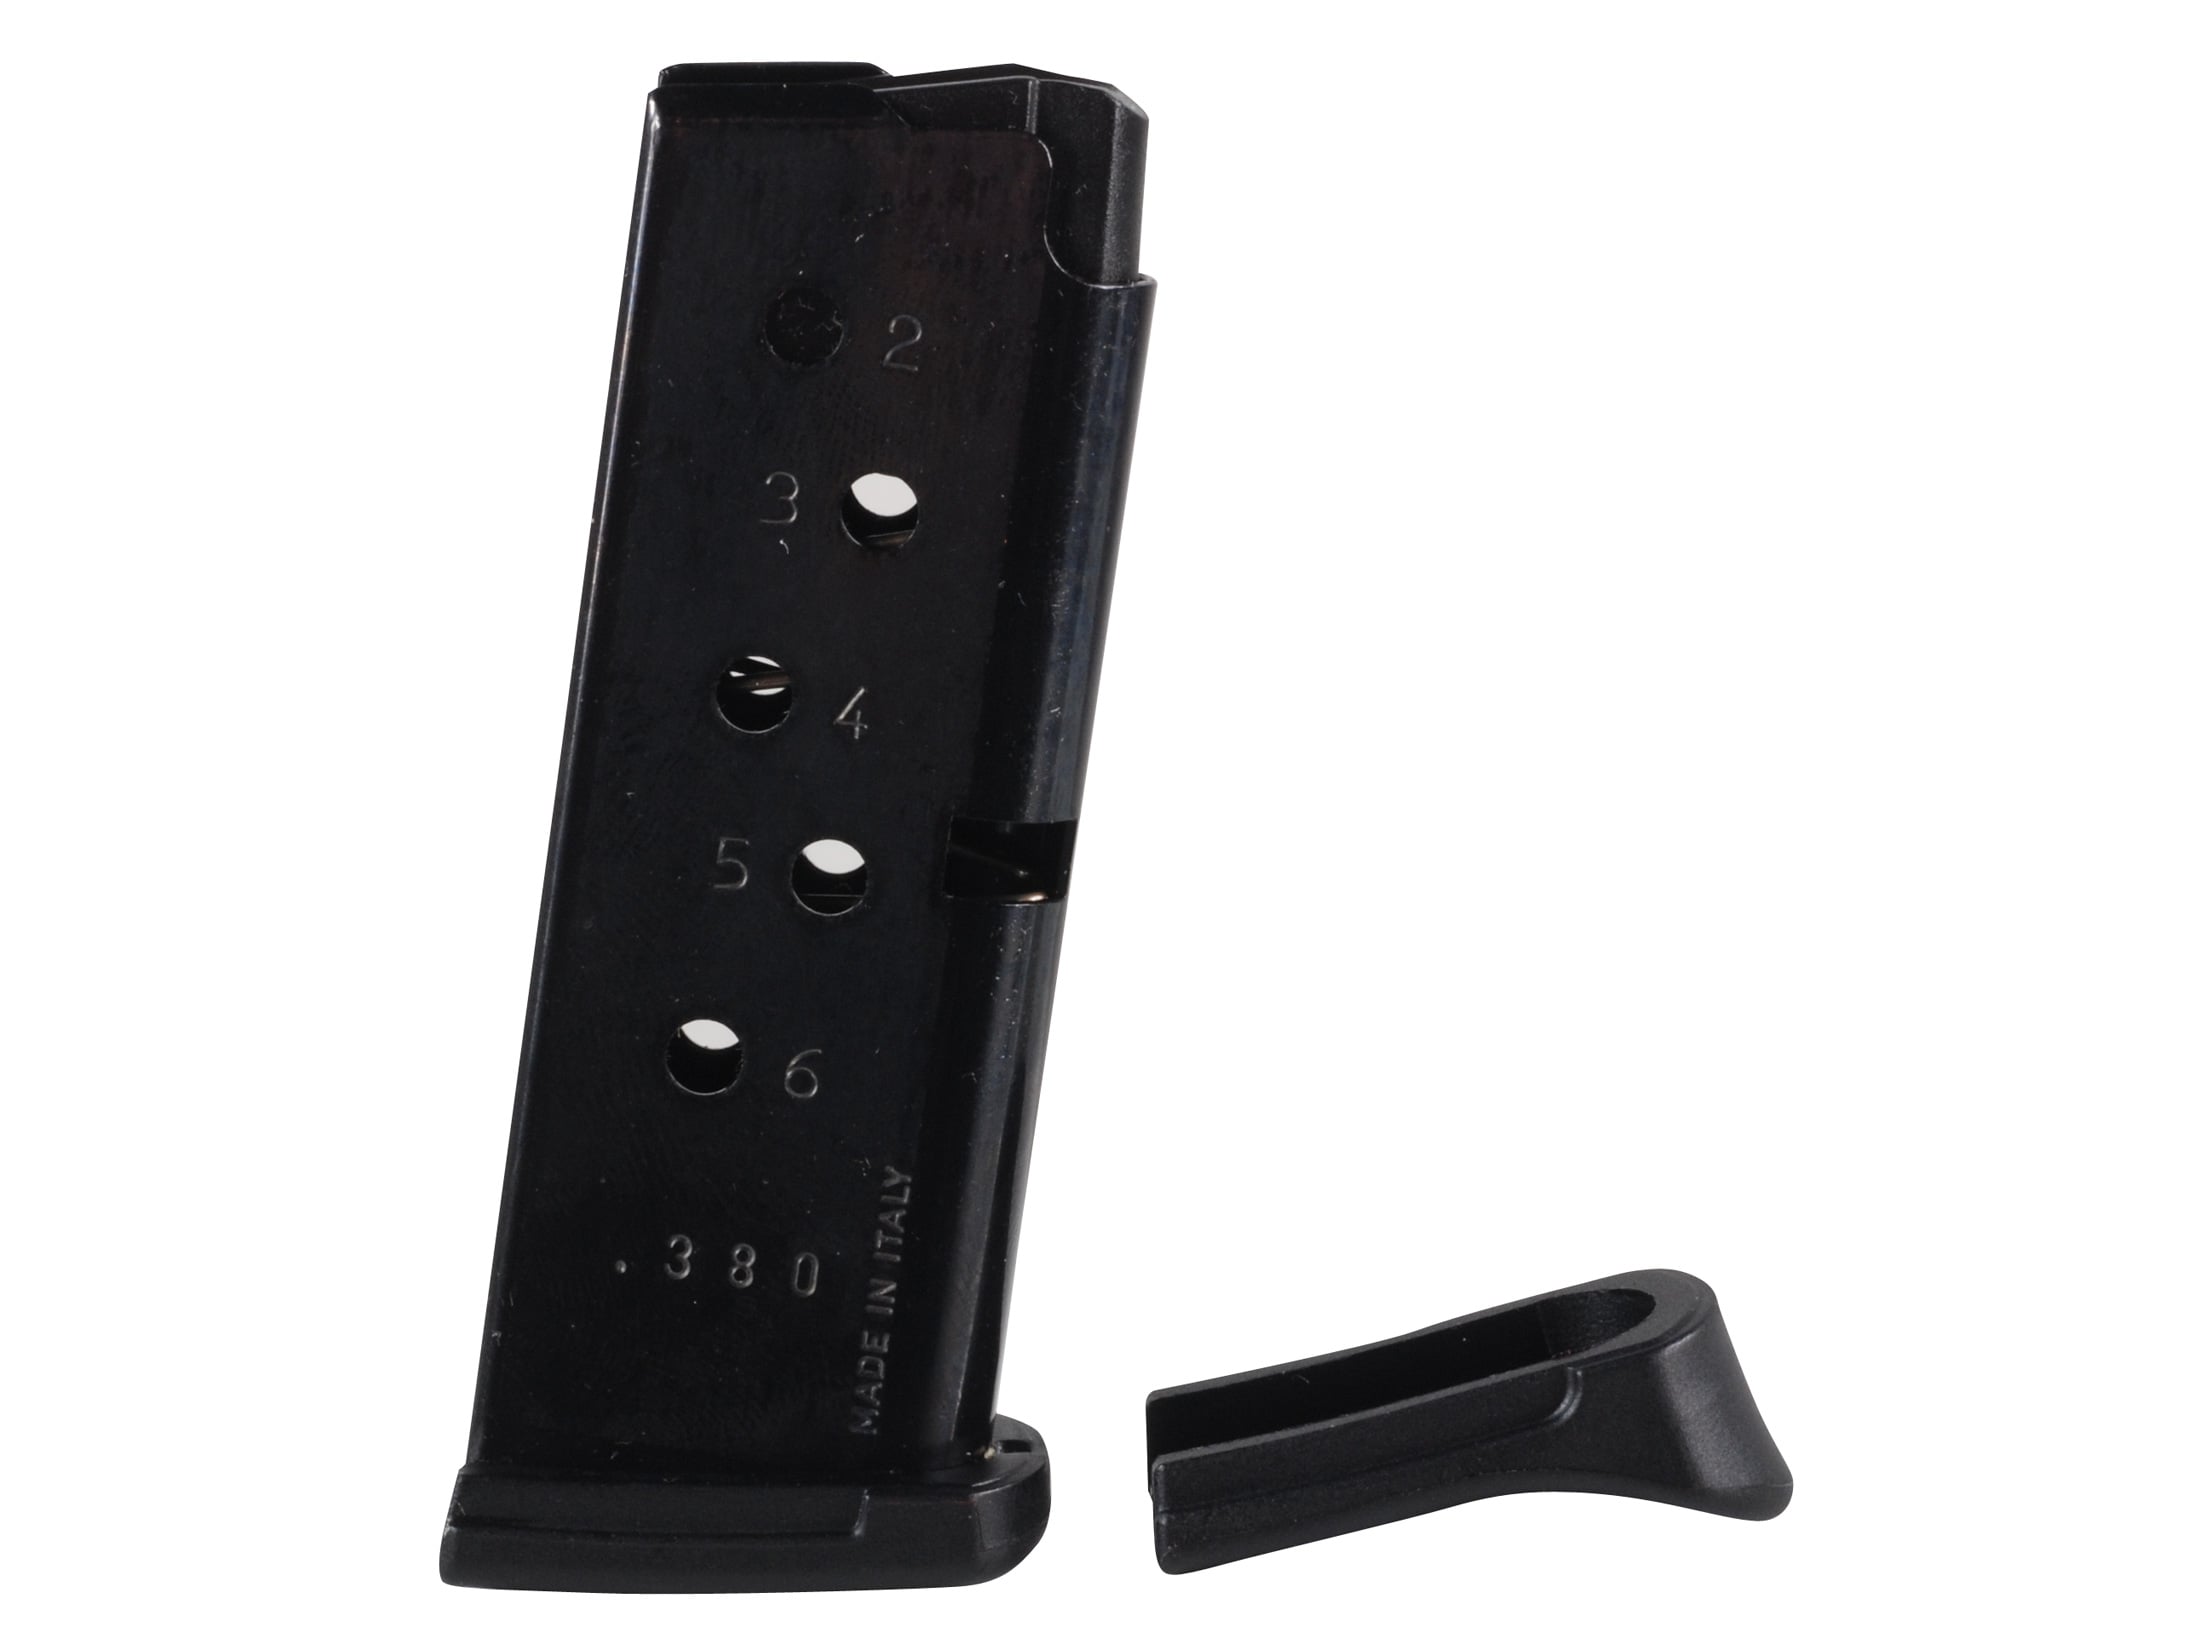 Details about   Kimber Micro Magazine 380 Auto ACP 7 Round Clip Stainless Mag 1200164A Extended 